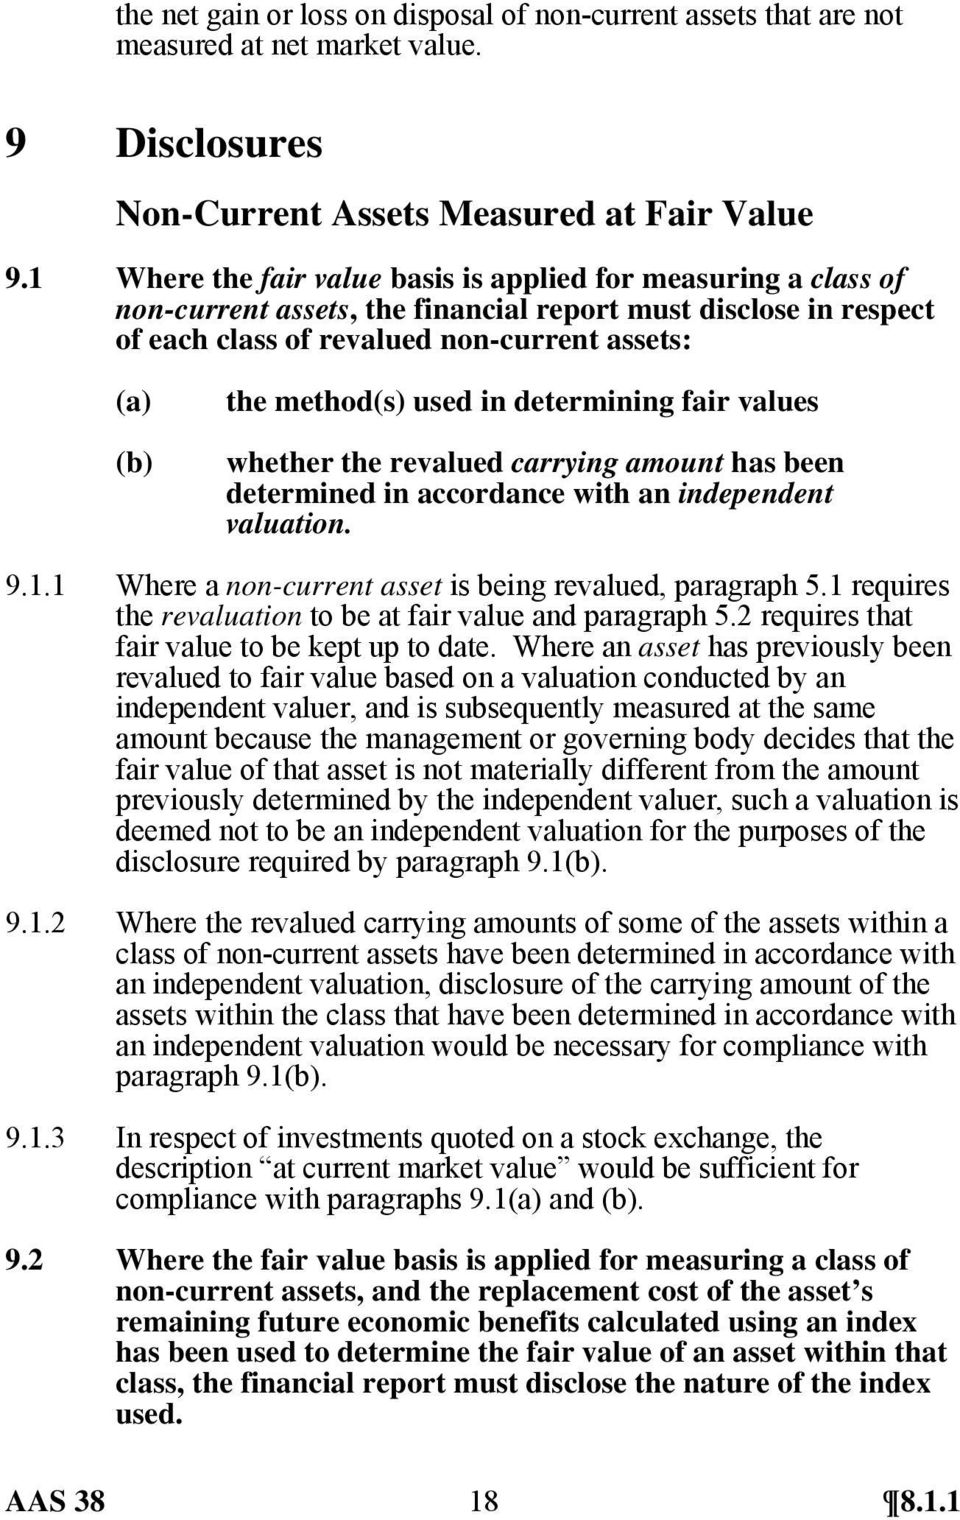 determining fair values whether the revalued carrying amount has been determined in accordance with an independent valuation. 9.1.1 Where a non-current asset is being revalued, paragraph 5.